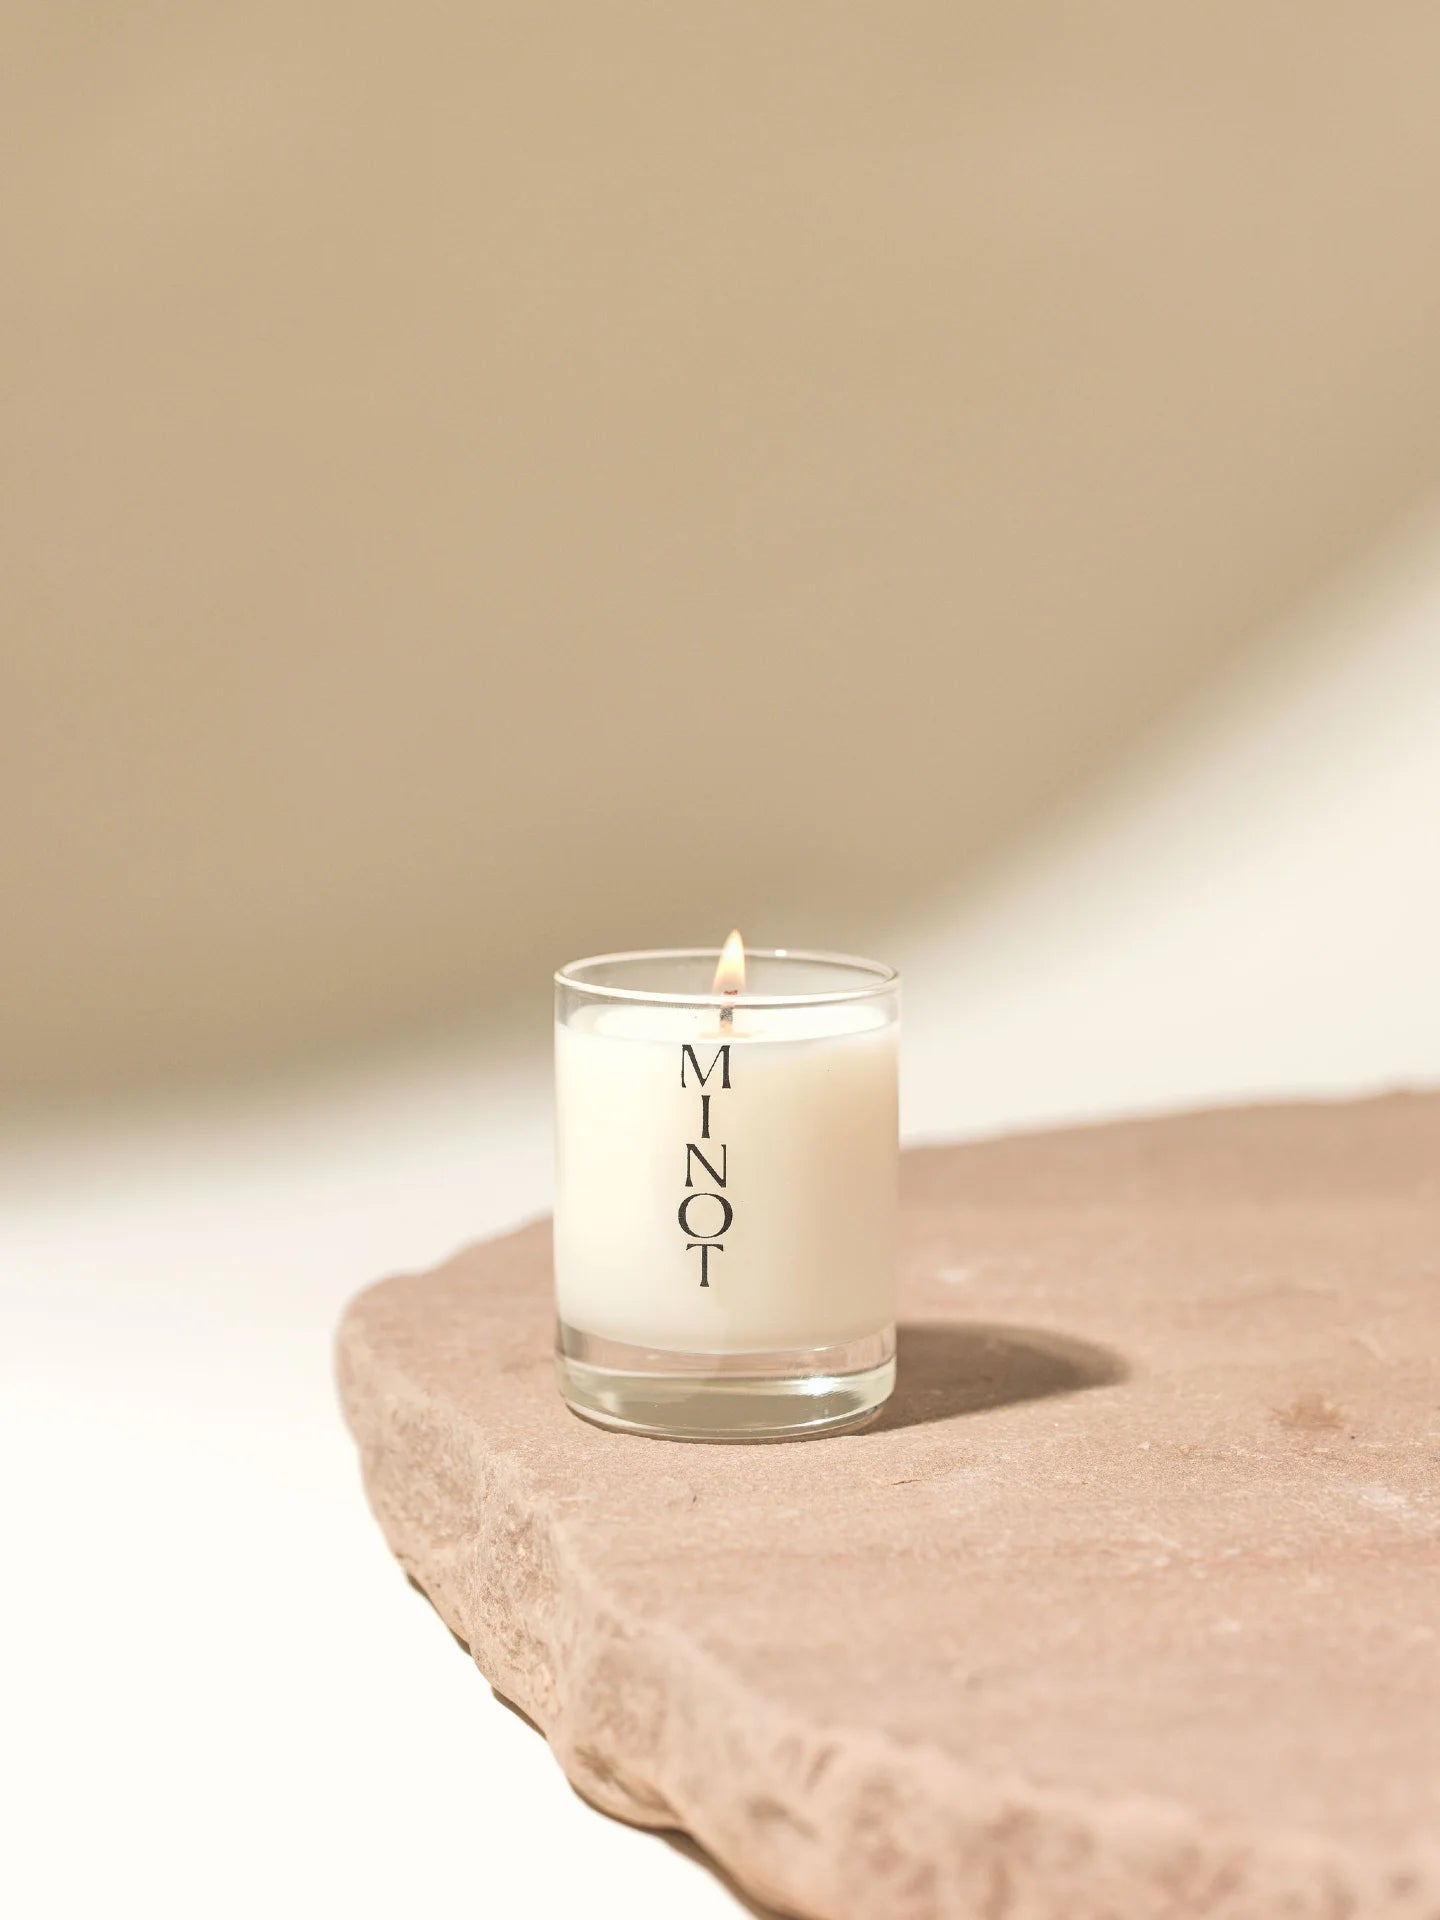 The Voyage Mini soy wax votive offers a fragrant blend of coconut, cedar, vetiver, and amyris